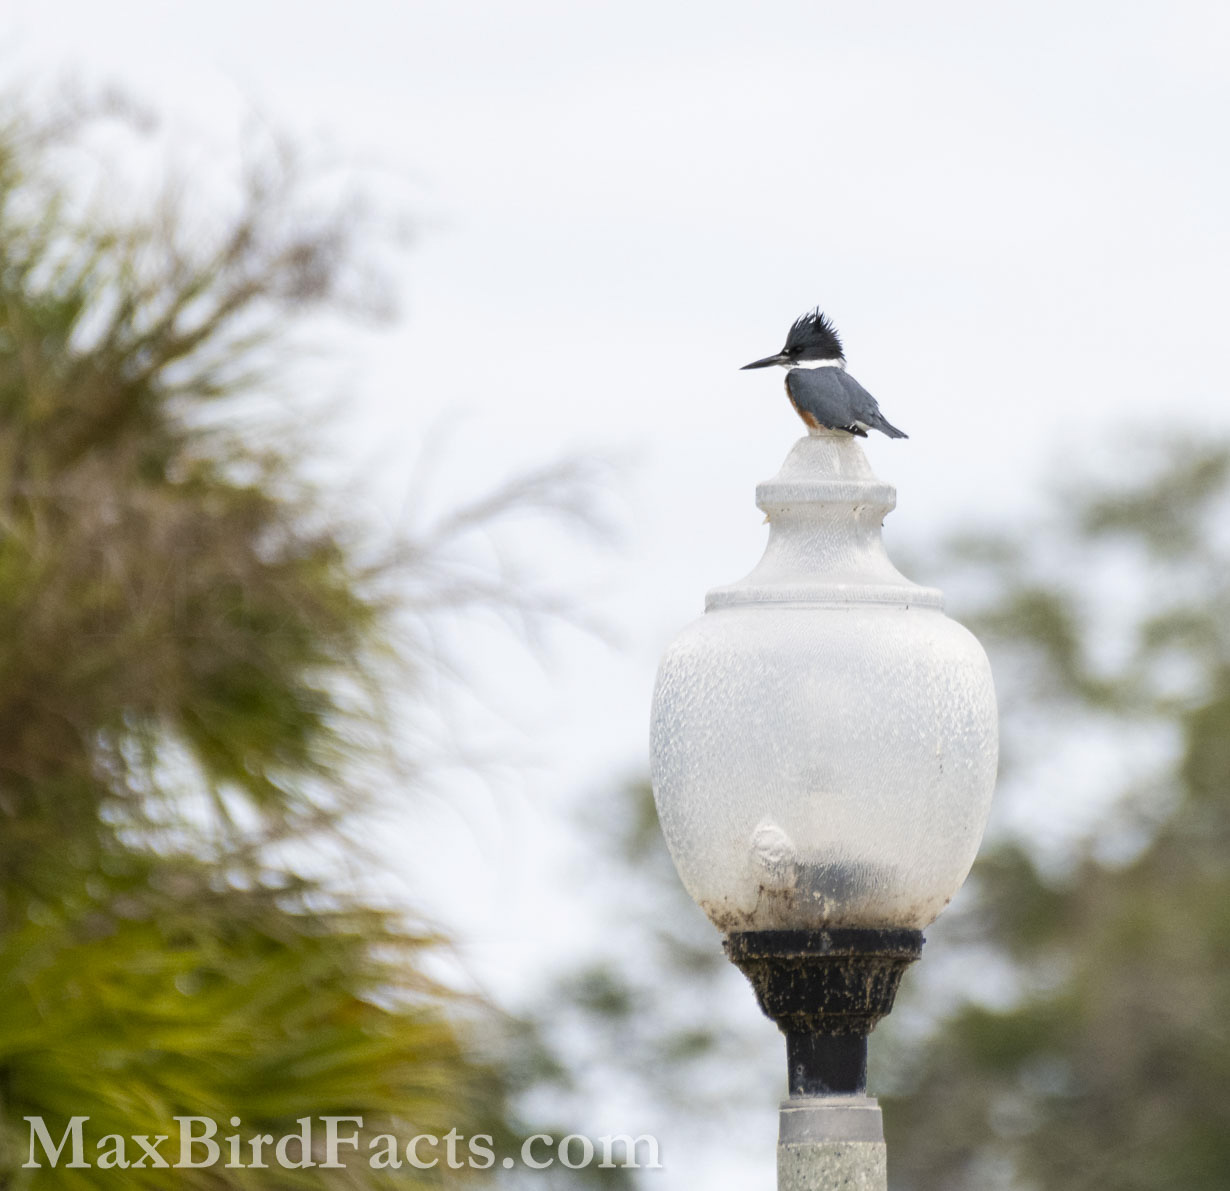 The resident Belted Kingfisher (Megaceryle alcyon) was extremely cooperative with our group for this walk!